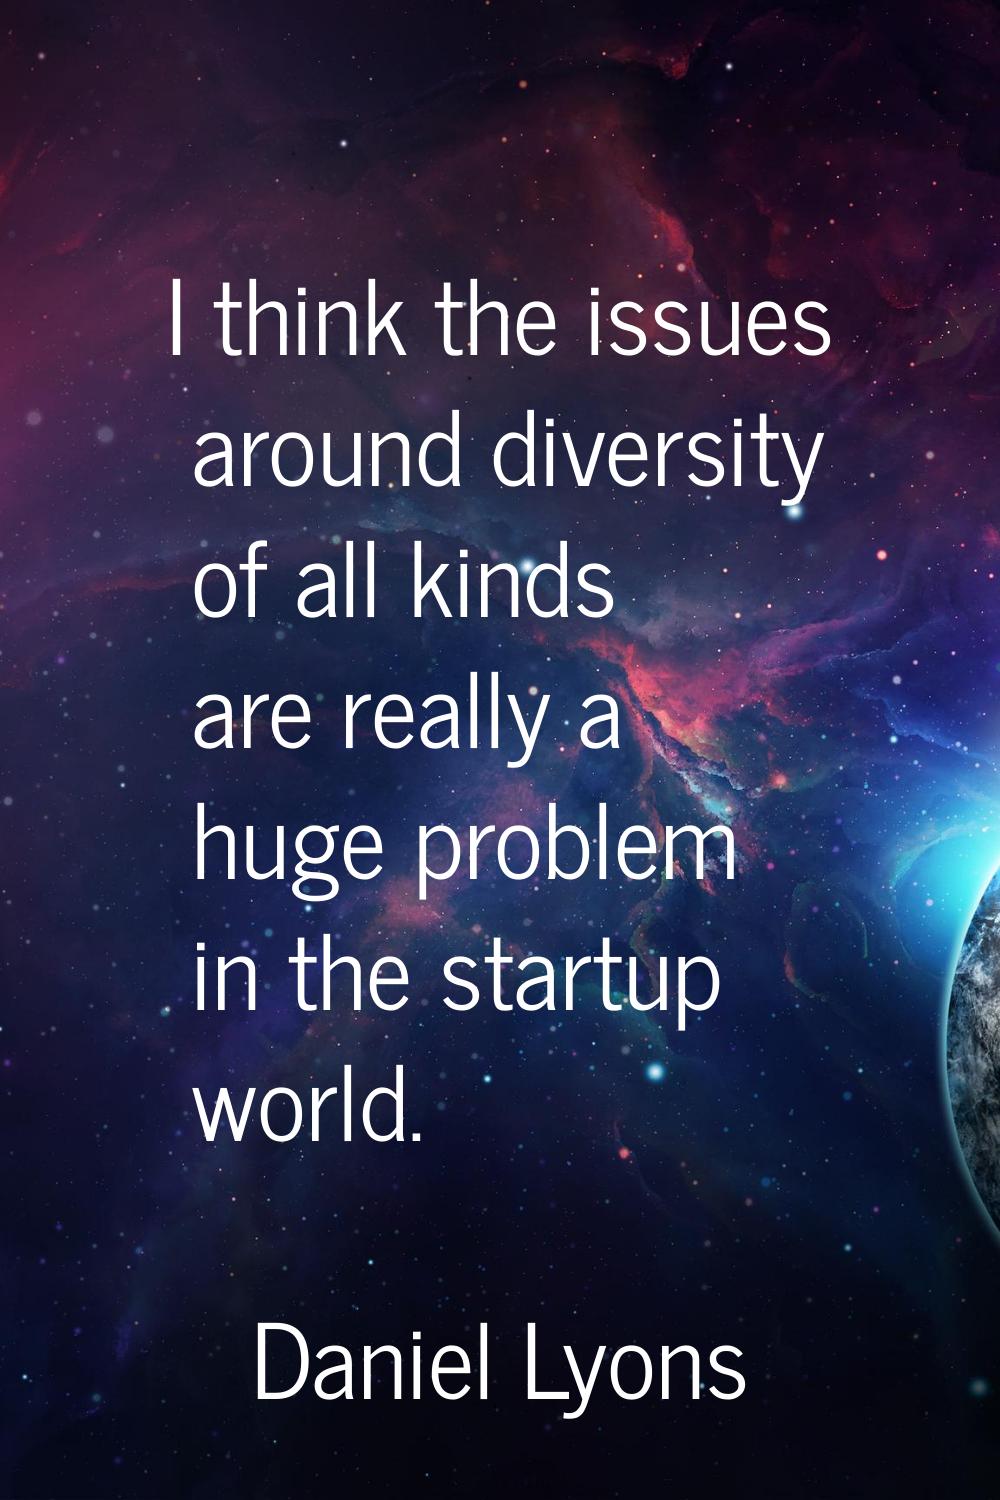 I think the issues around diversity of all kinds are really a huge problem in the startup world.